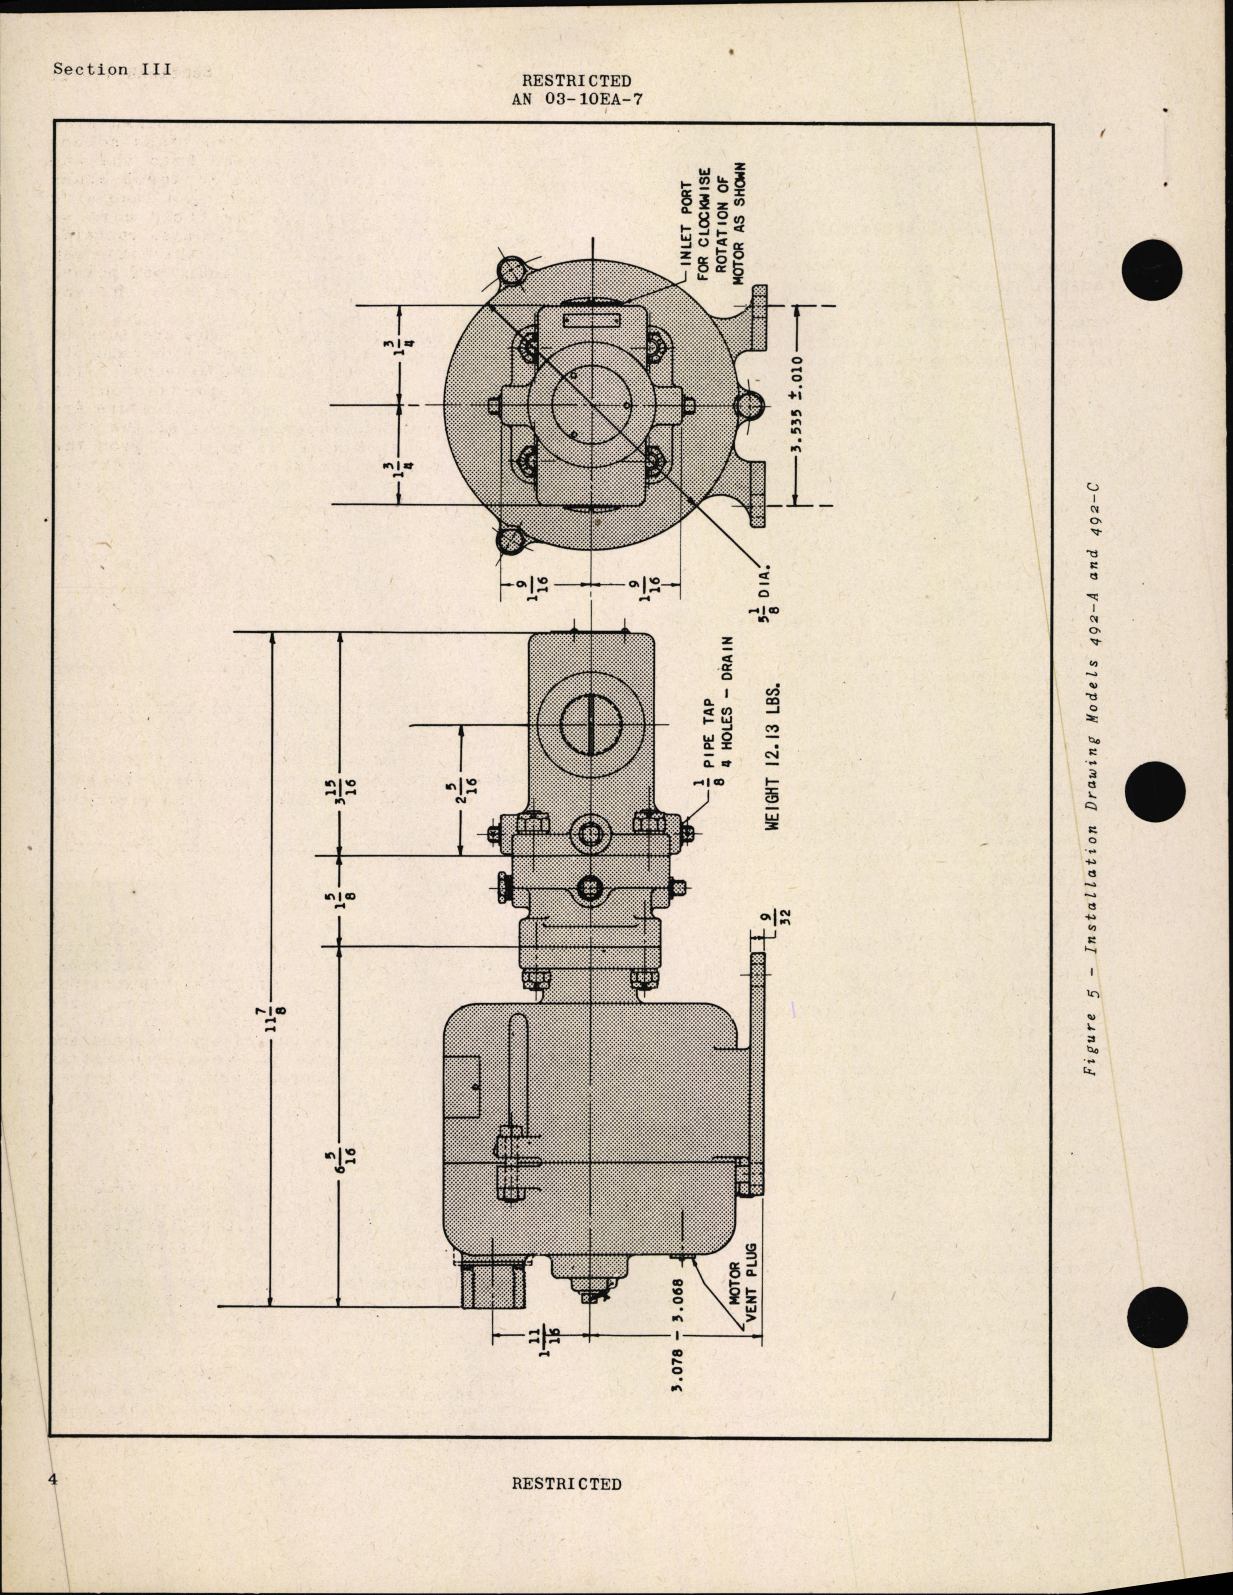 Sample page 8 from AirCorps Library document: Handbook of Instructions with Parts Catalog for Type F-7 Electric Motor Driven Fuel Pumps